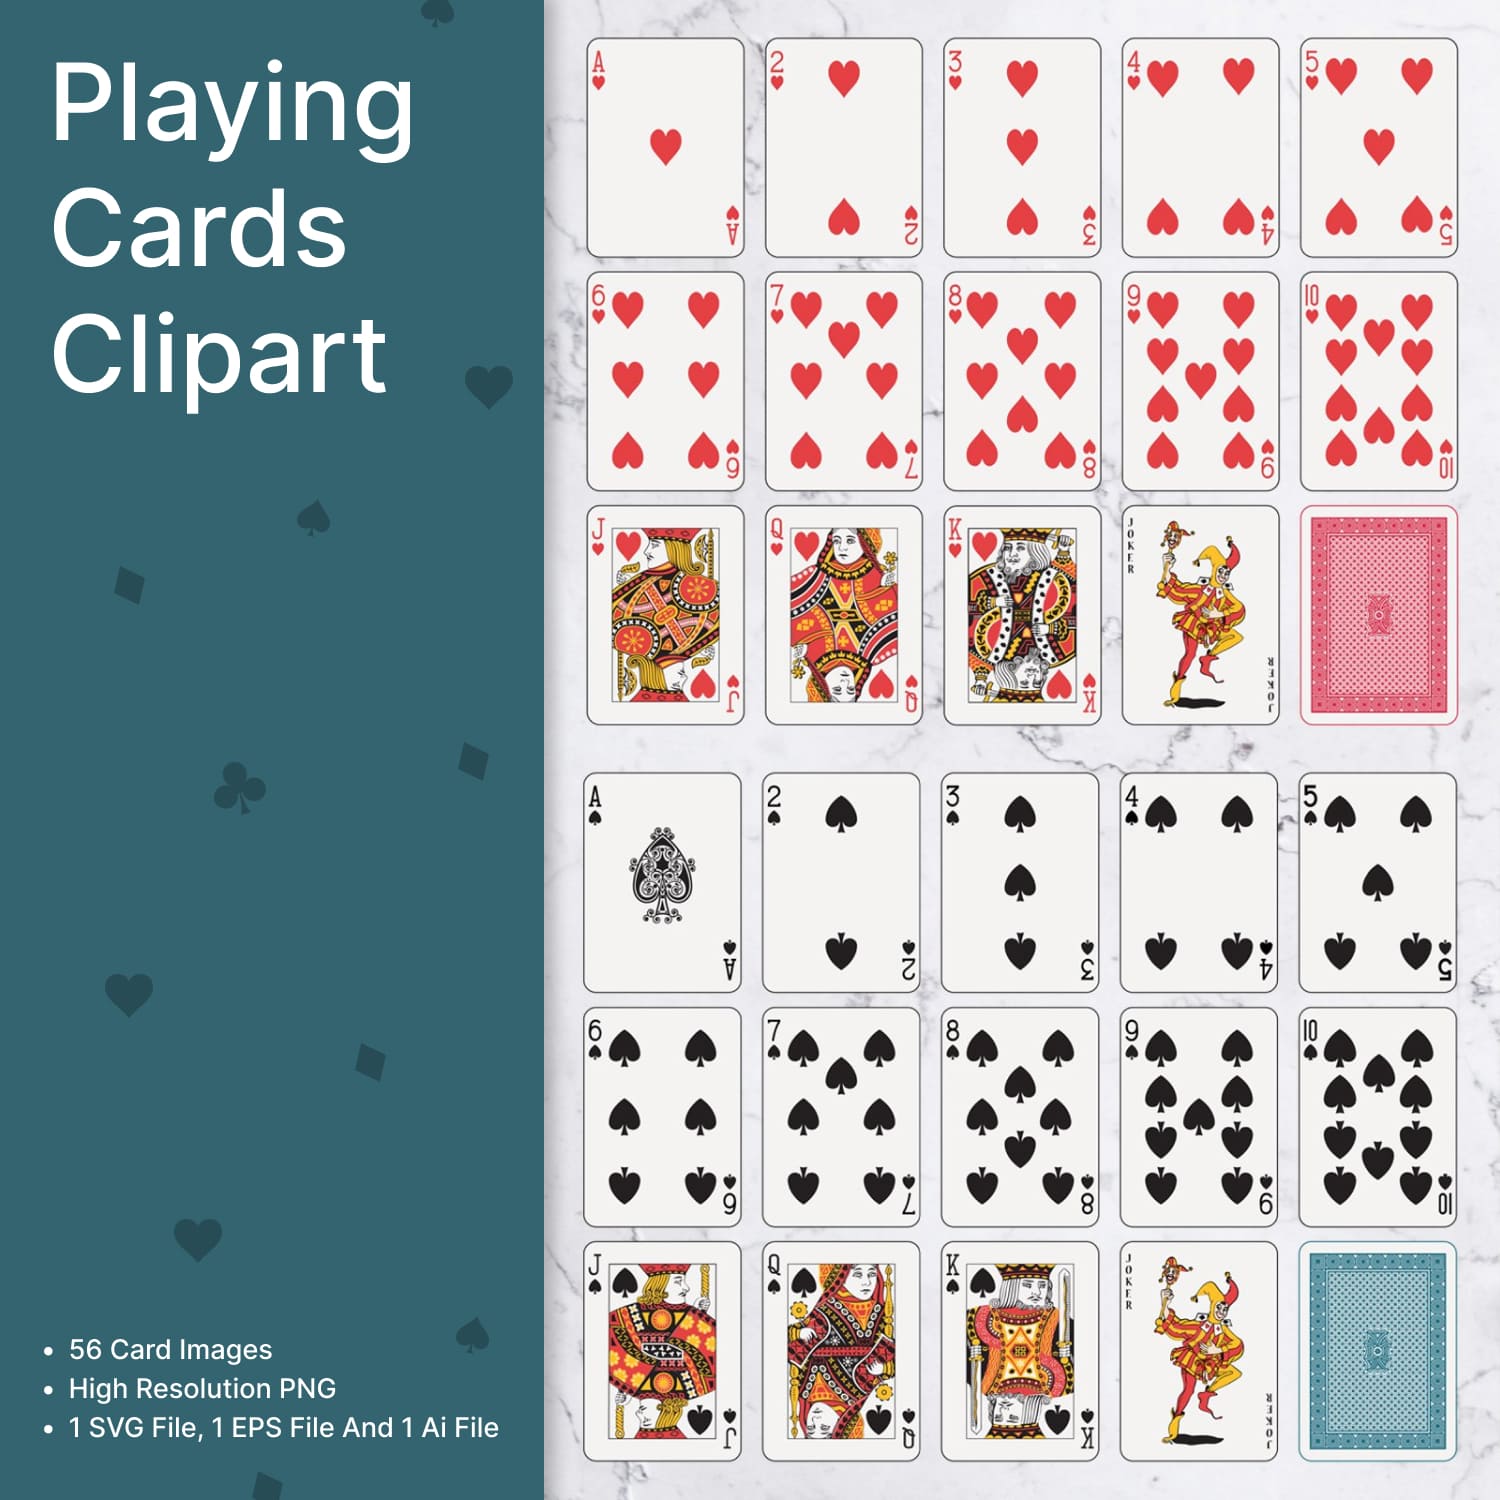 Playing cards clipart - main image preview.